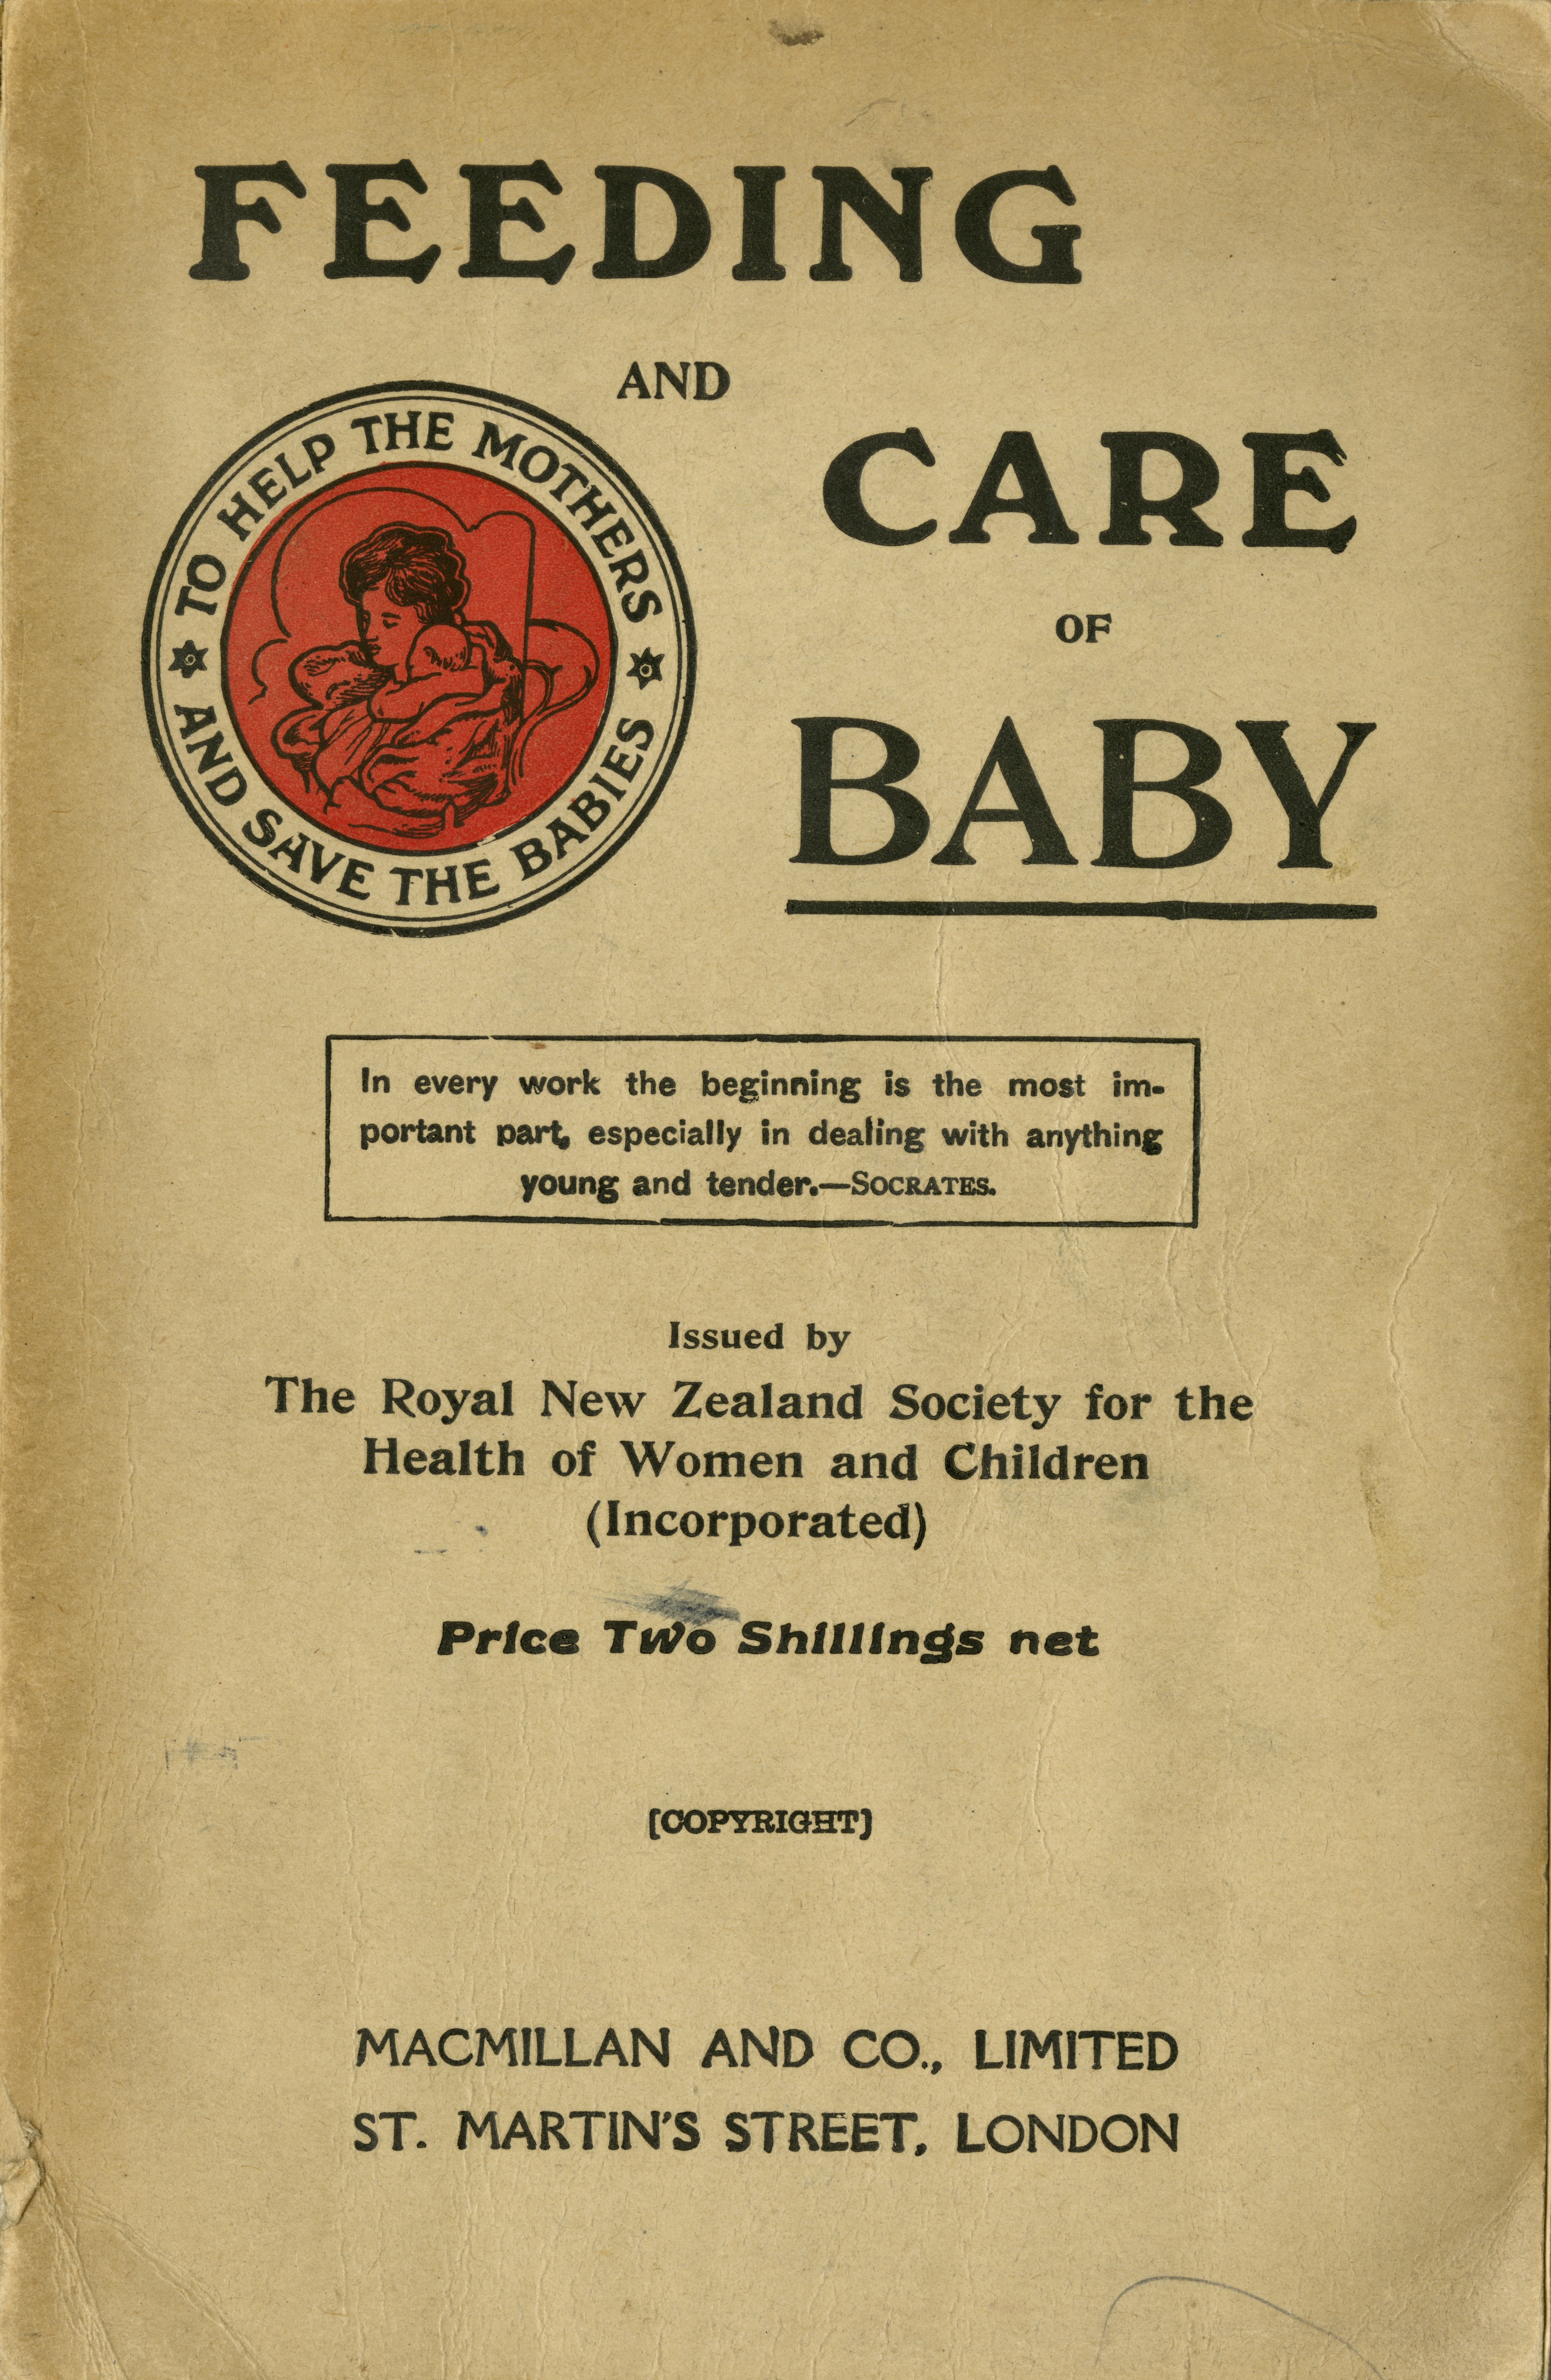 Patterns produced by the National Council for Maternity and Child Welfare